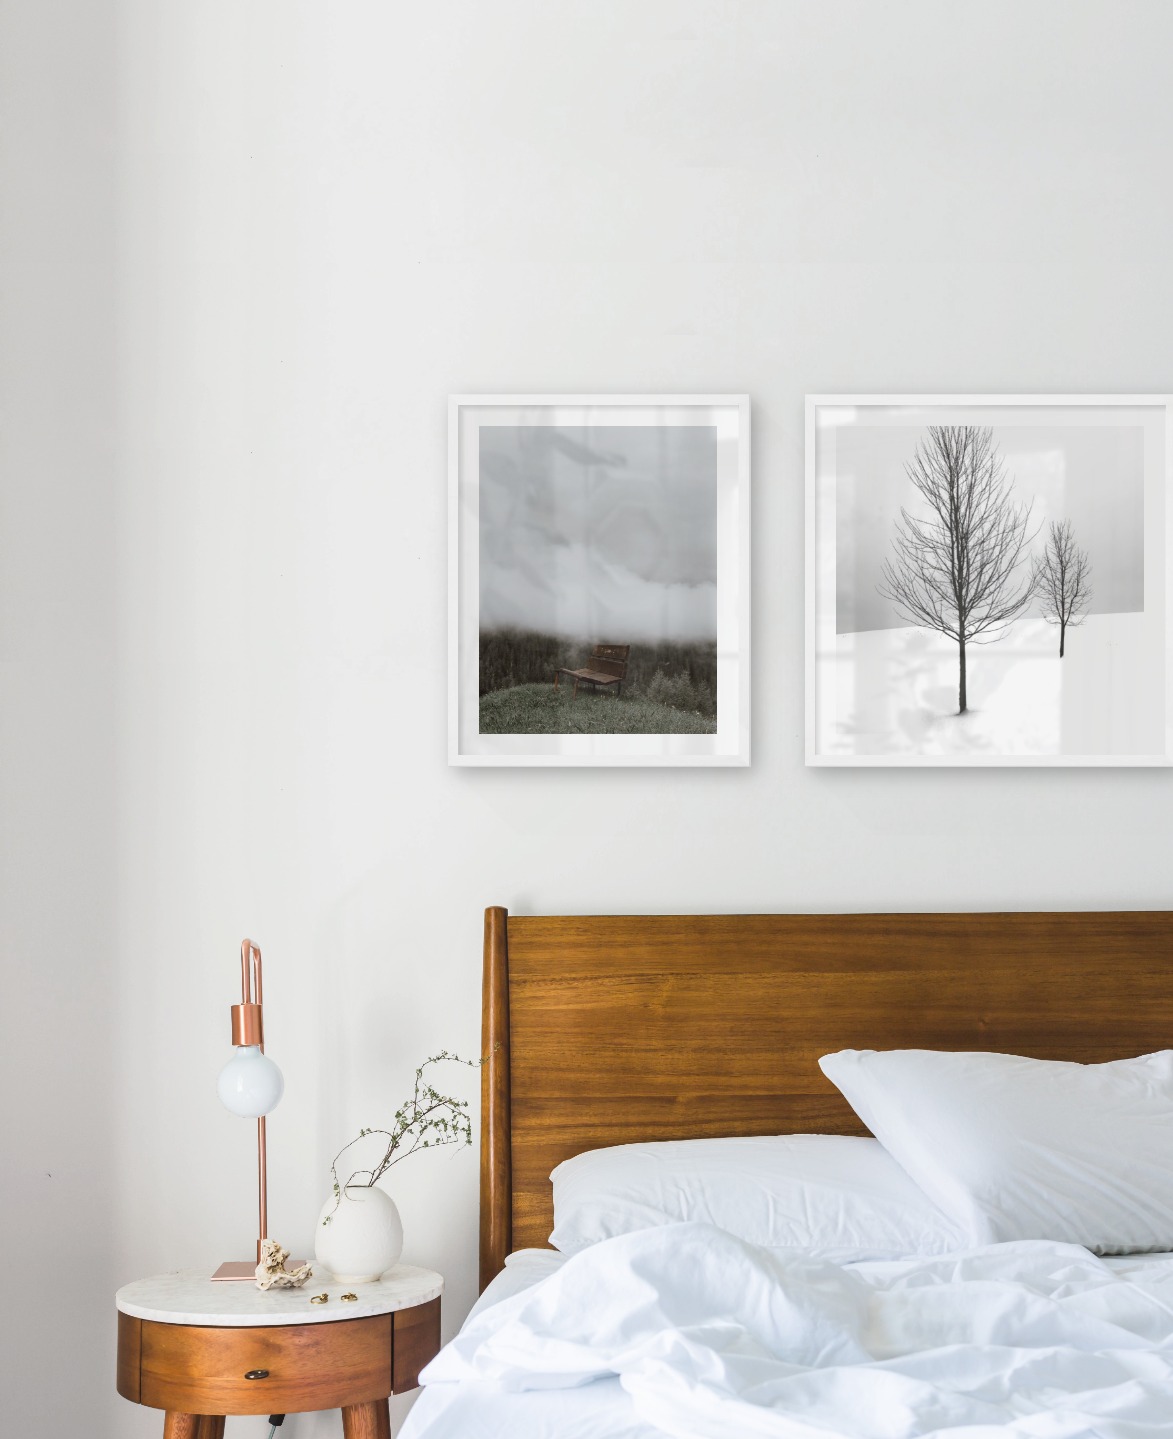 Gallery wall with picture frames in white in sizes 40x50 and 50x50 with prints "Bench in misty nature" and "Trees in the snow"